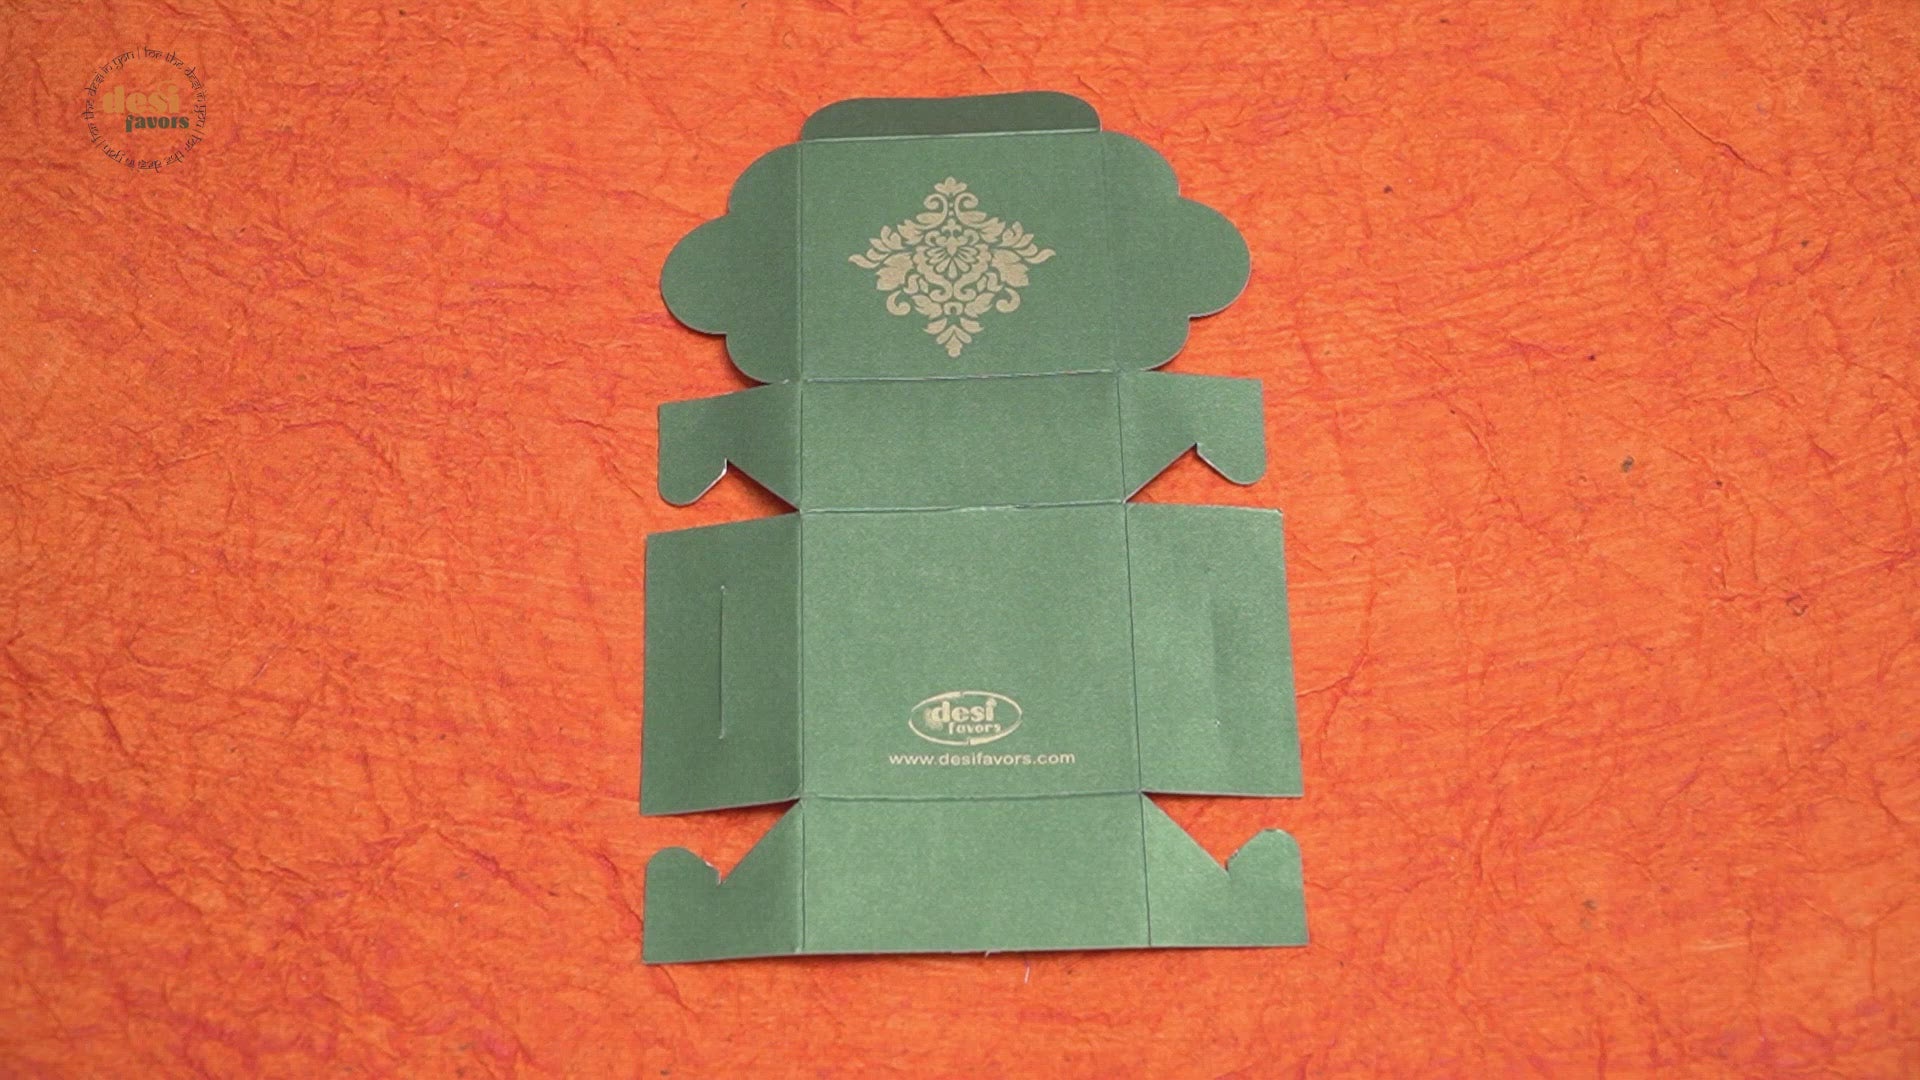 Folded paper boxes for gifts